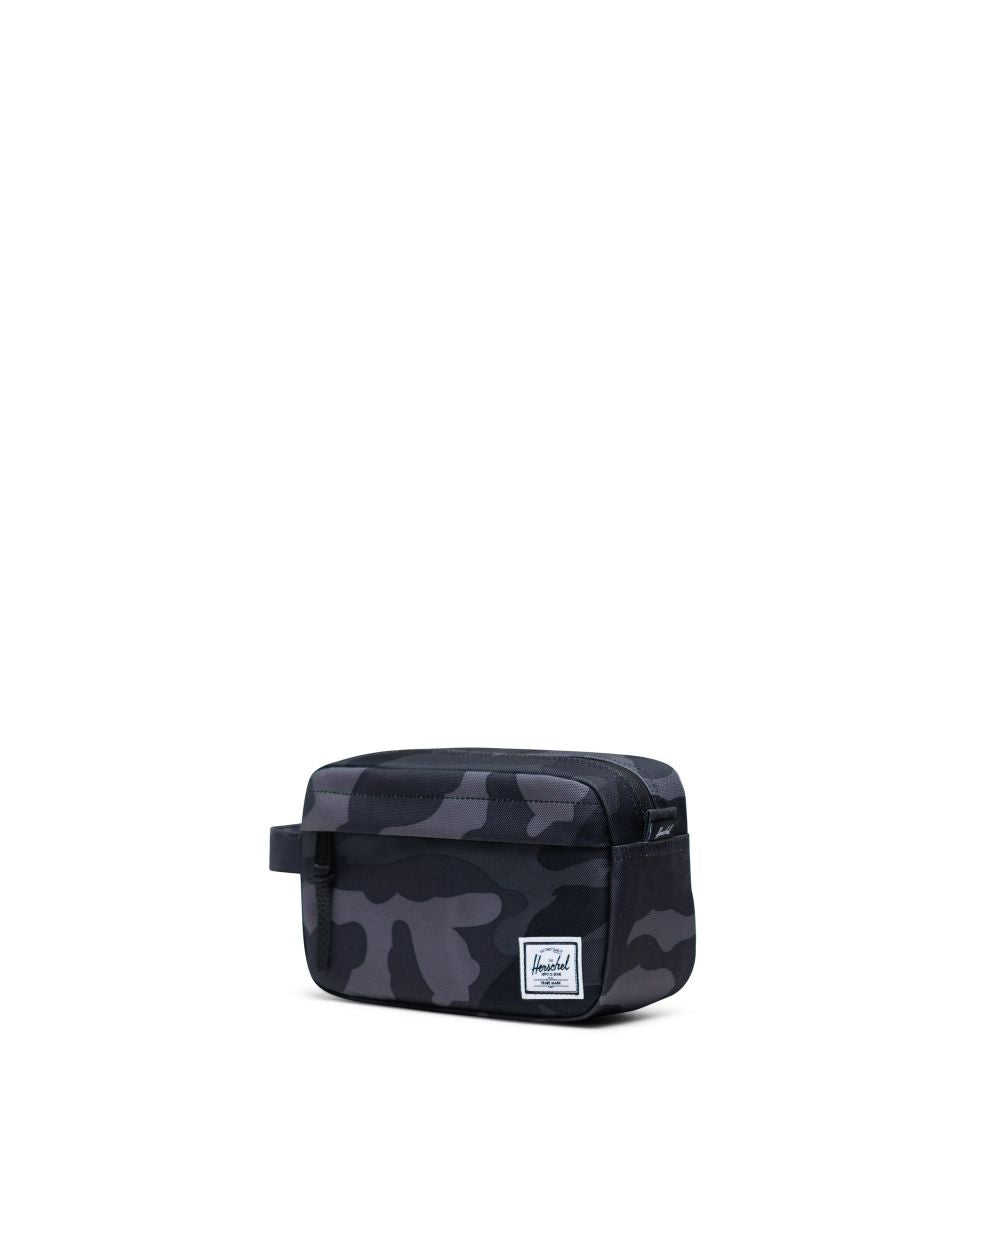 Herschel Supply Co -  Chapter Travel Kit Carry-On, Night Camo